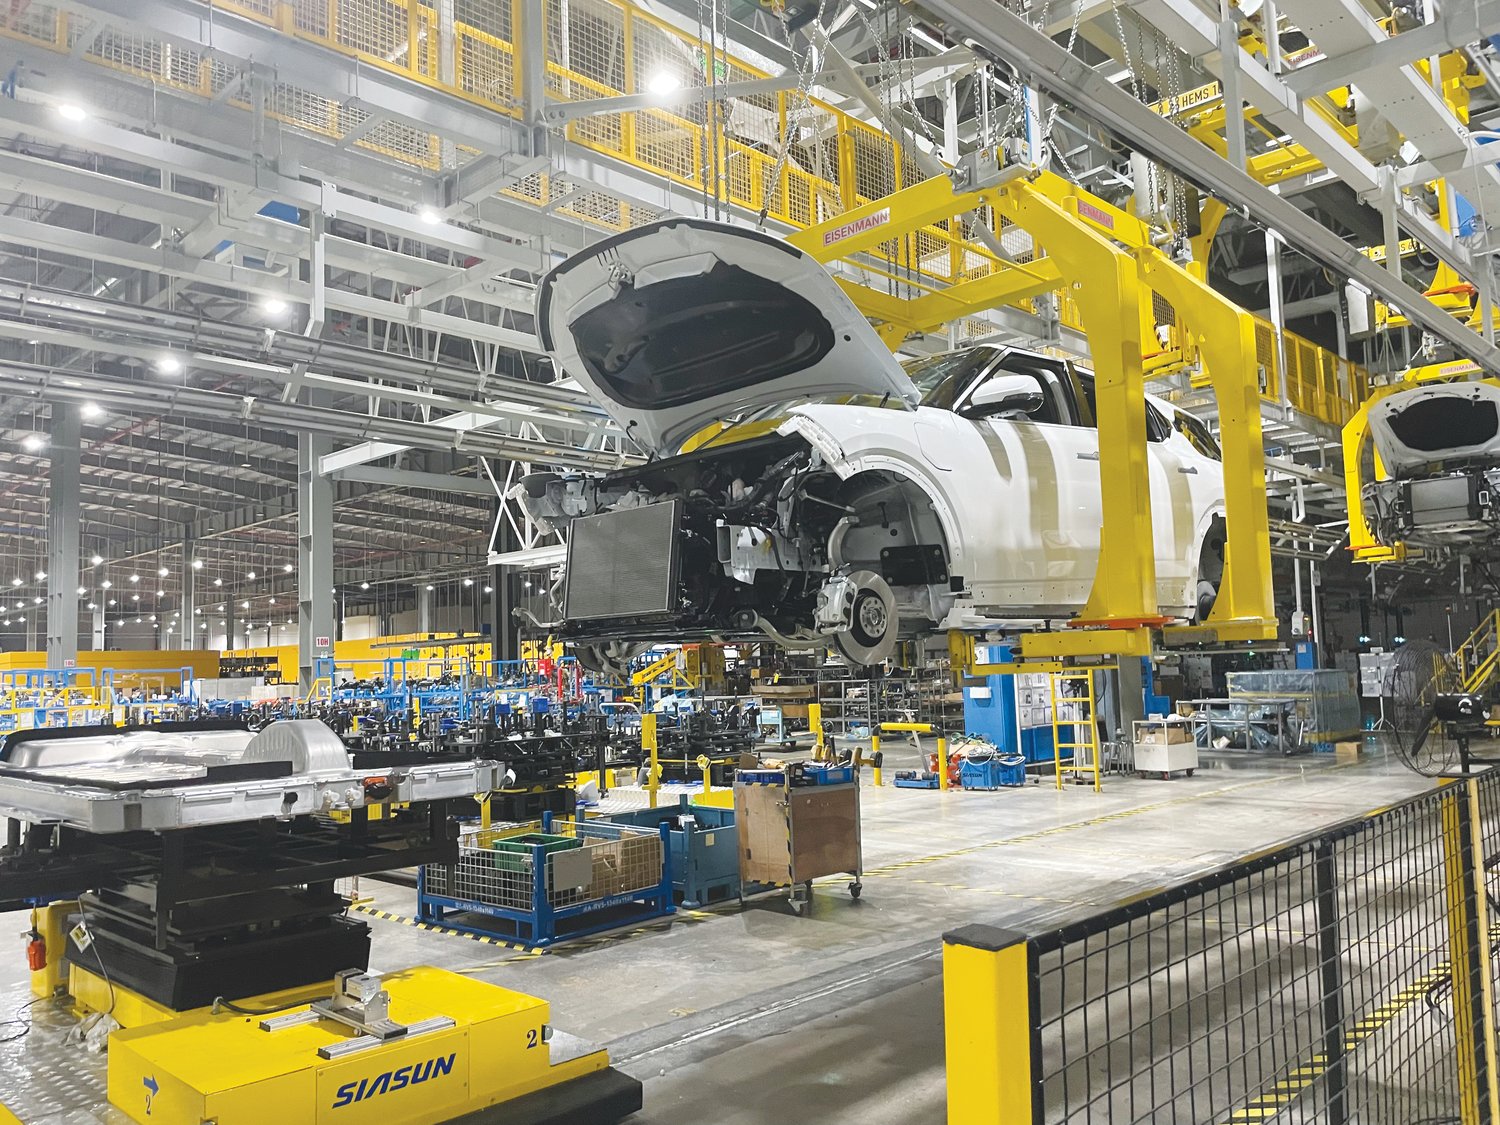 A look inside the VF-9 SUV as it travels down VinFast's assembly line in Haiphong. VinFast says it is preparing to scale production to send the VF-9 to mass market by September. The electric vehicle will be one of two cars to be manufactured when VinFast's plant opens in Chatham County in 2024.